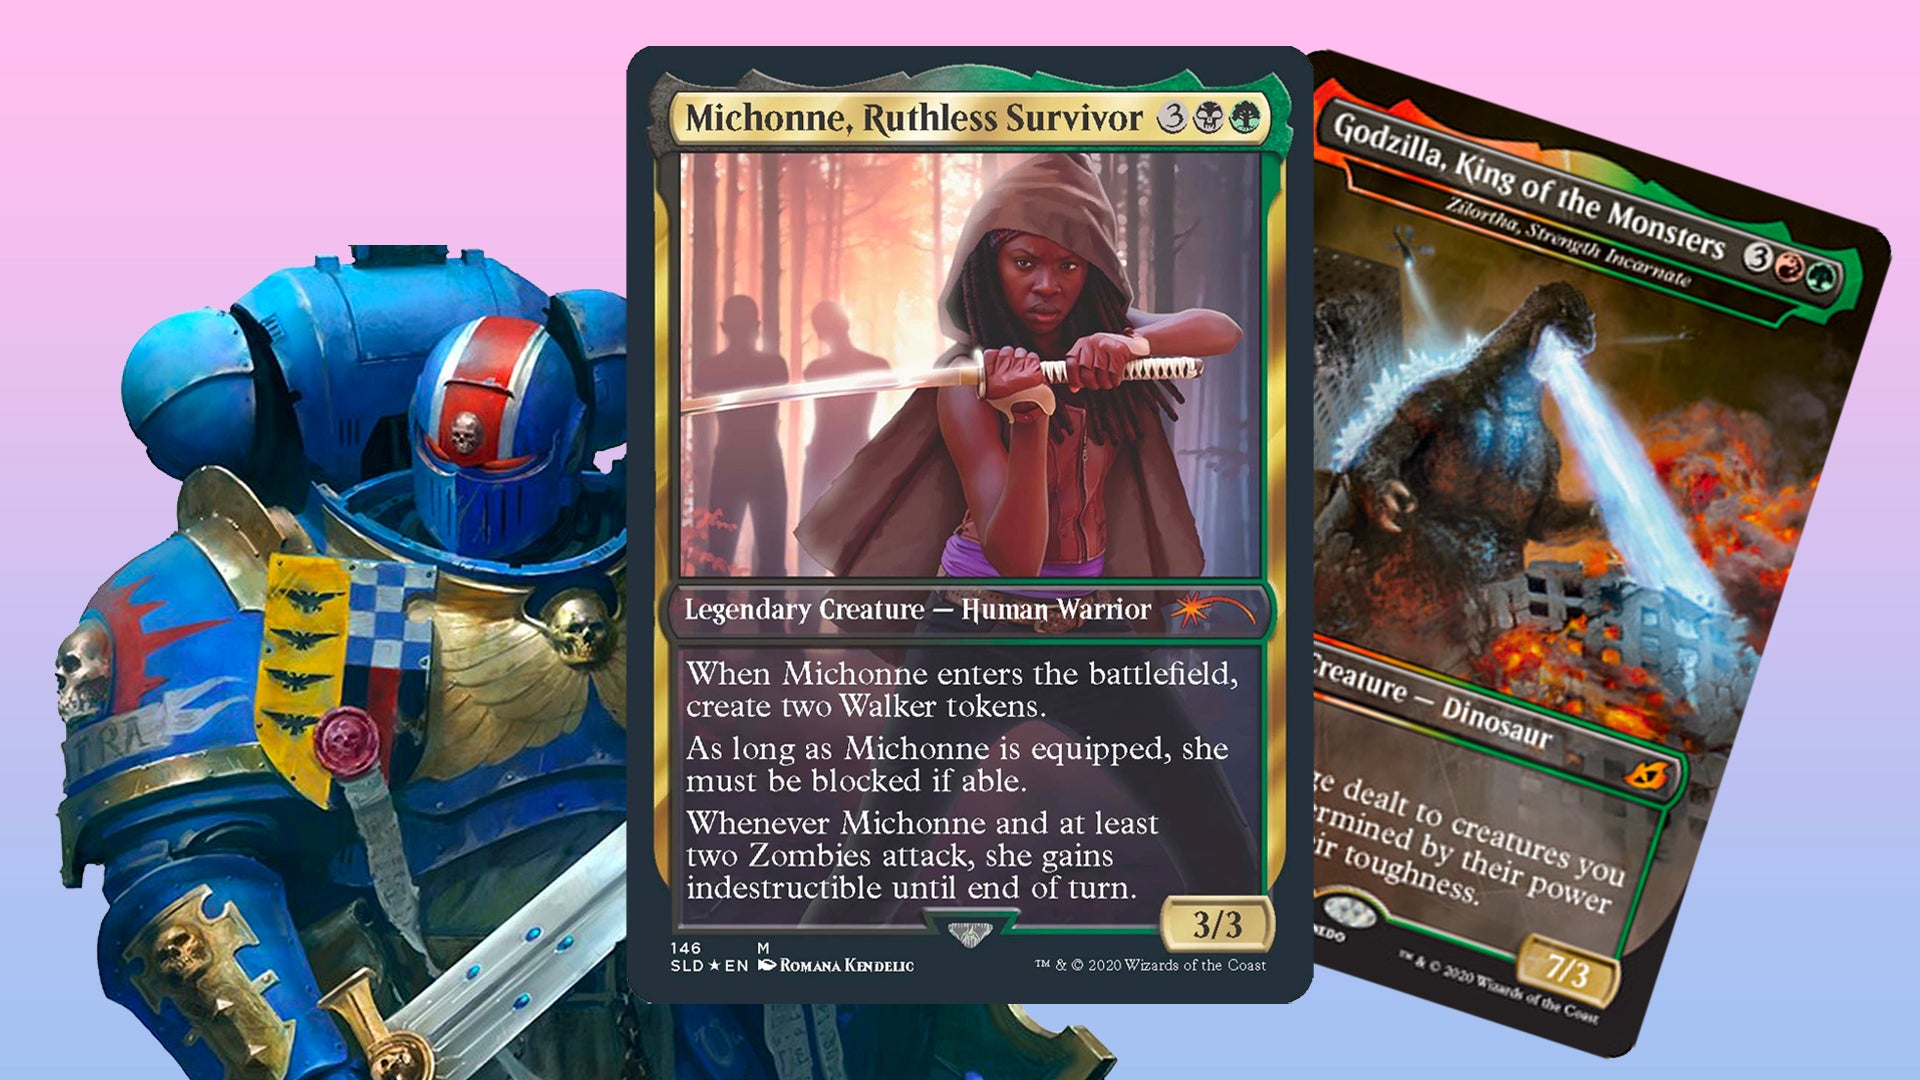 Image for Magic: The Gathering’s pop-culture crossovers are full of potential, but must learn from the mistakes of The Walking Dead